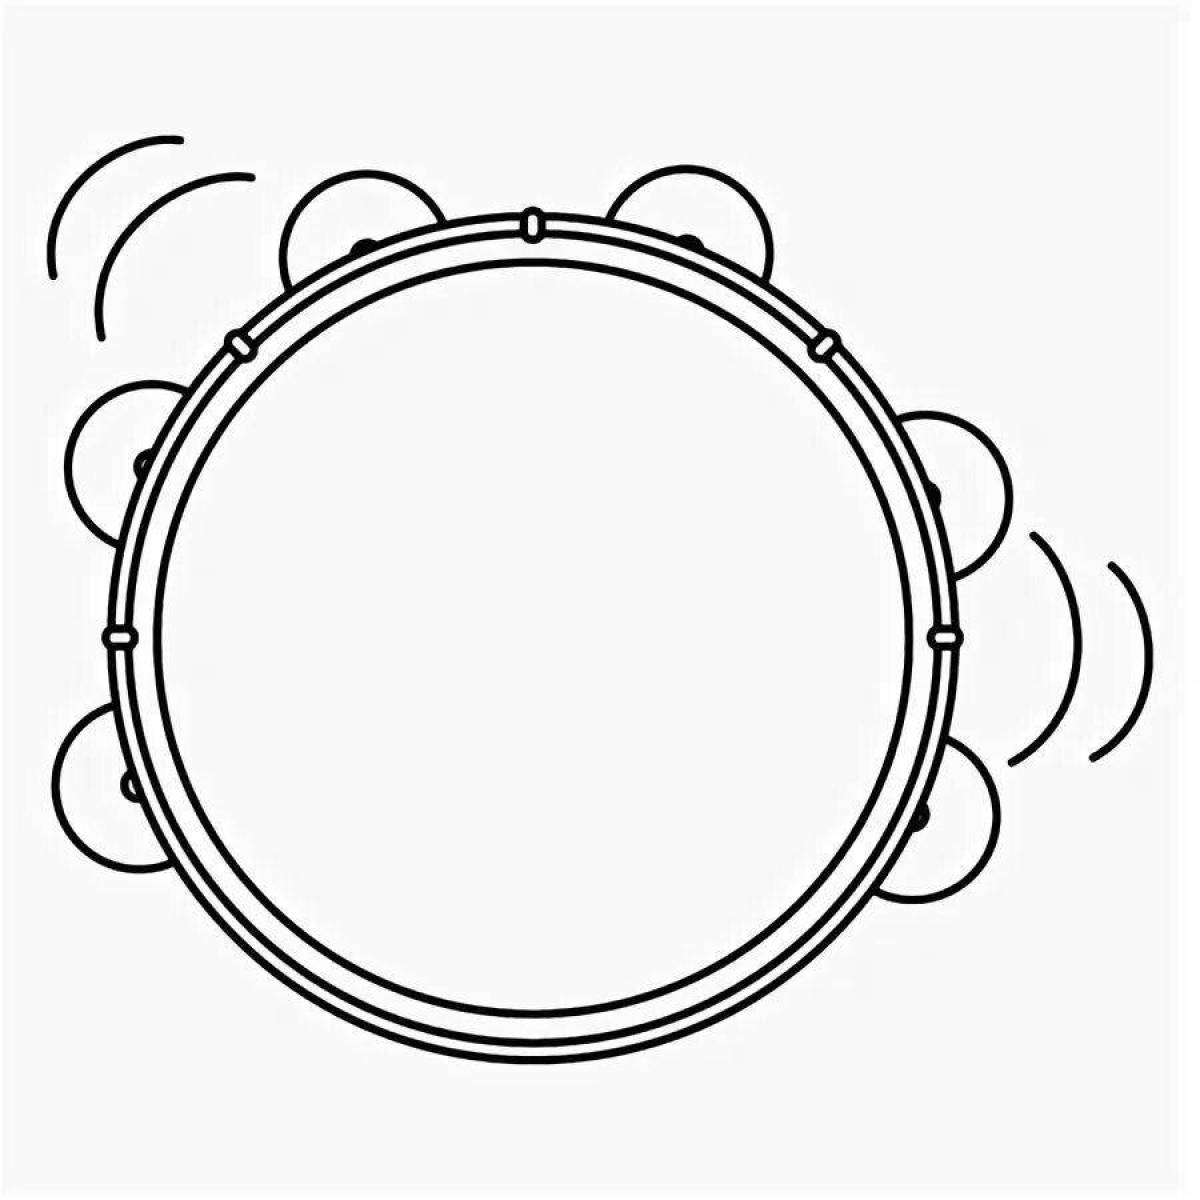 Sparkling tambourine coloring page